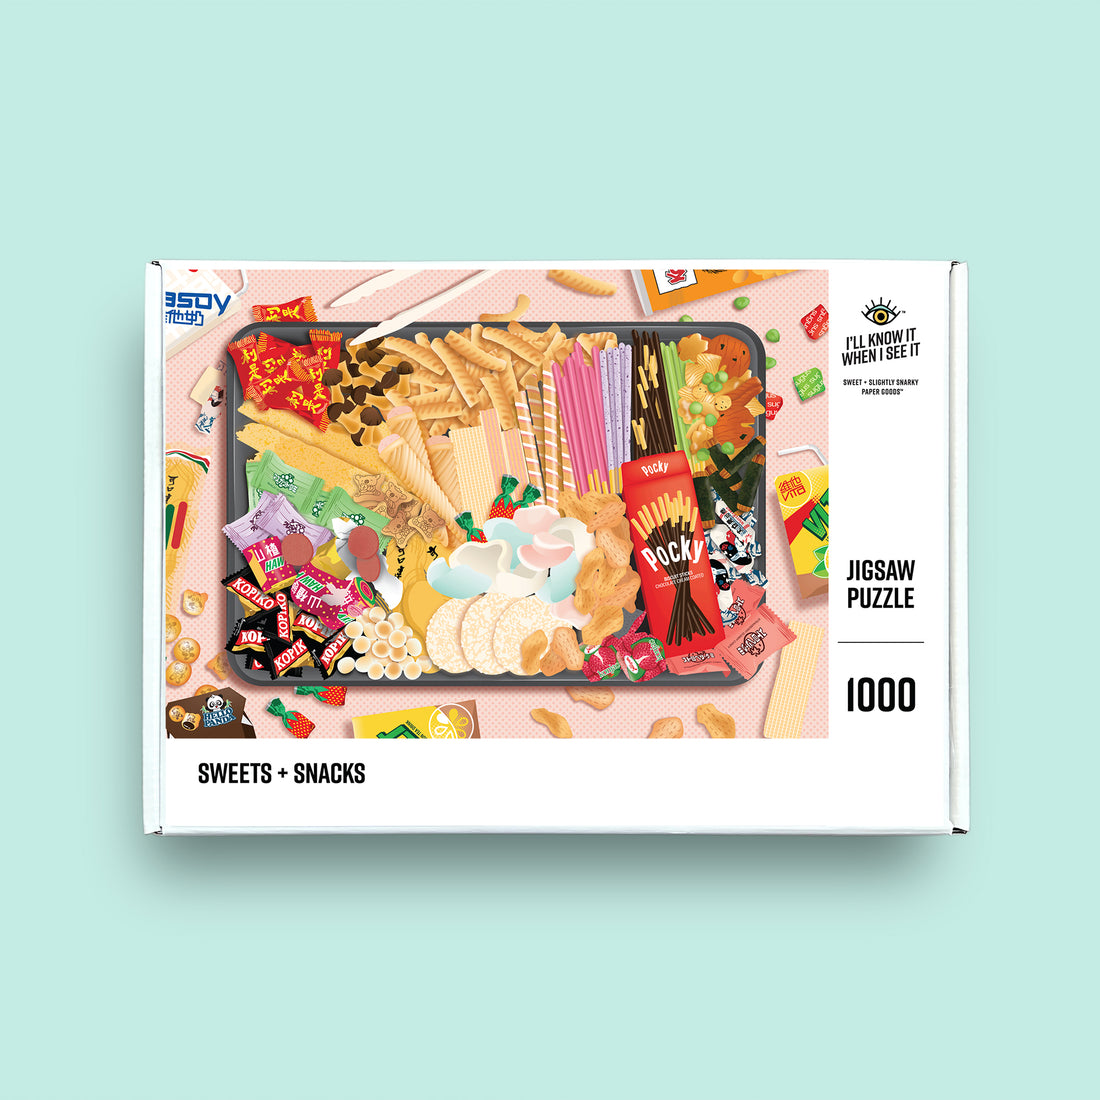 Asian sweets and snacks 1000 piece jigsaw puzzle by I&